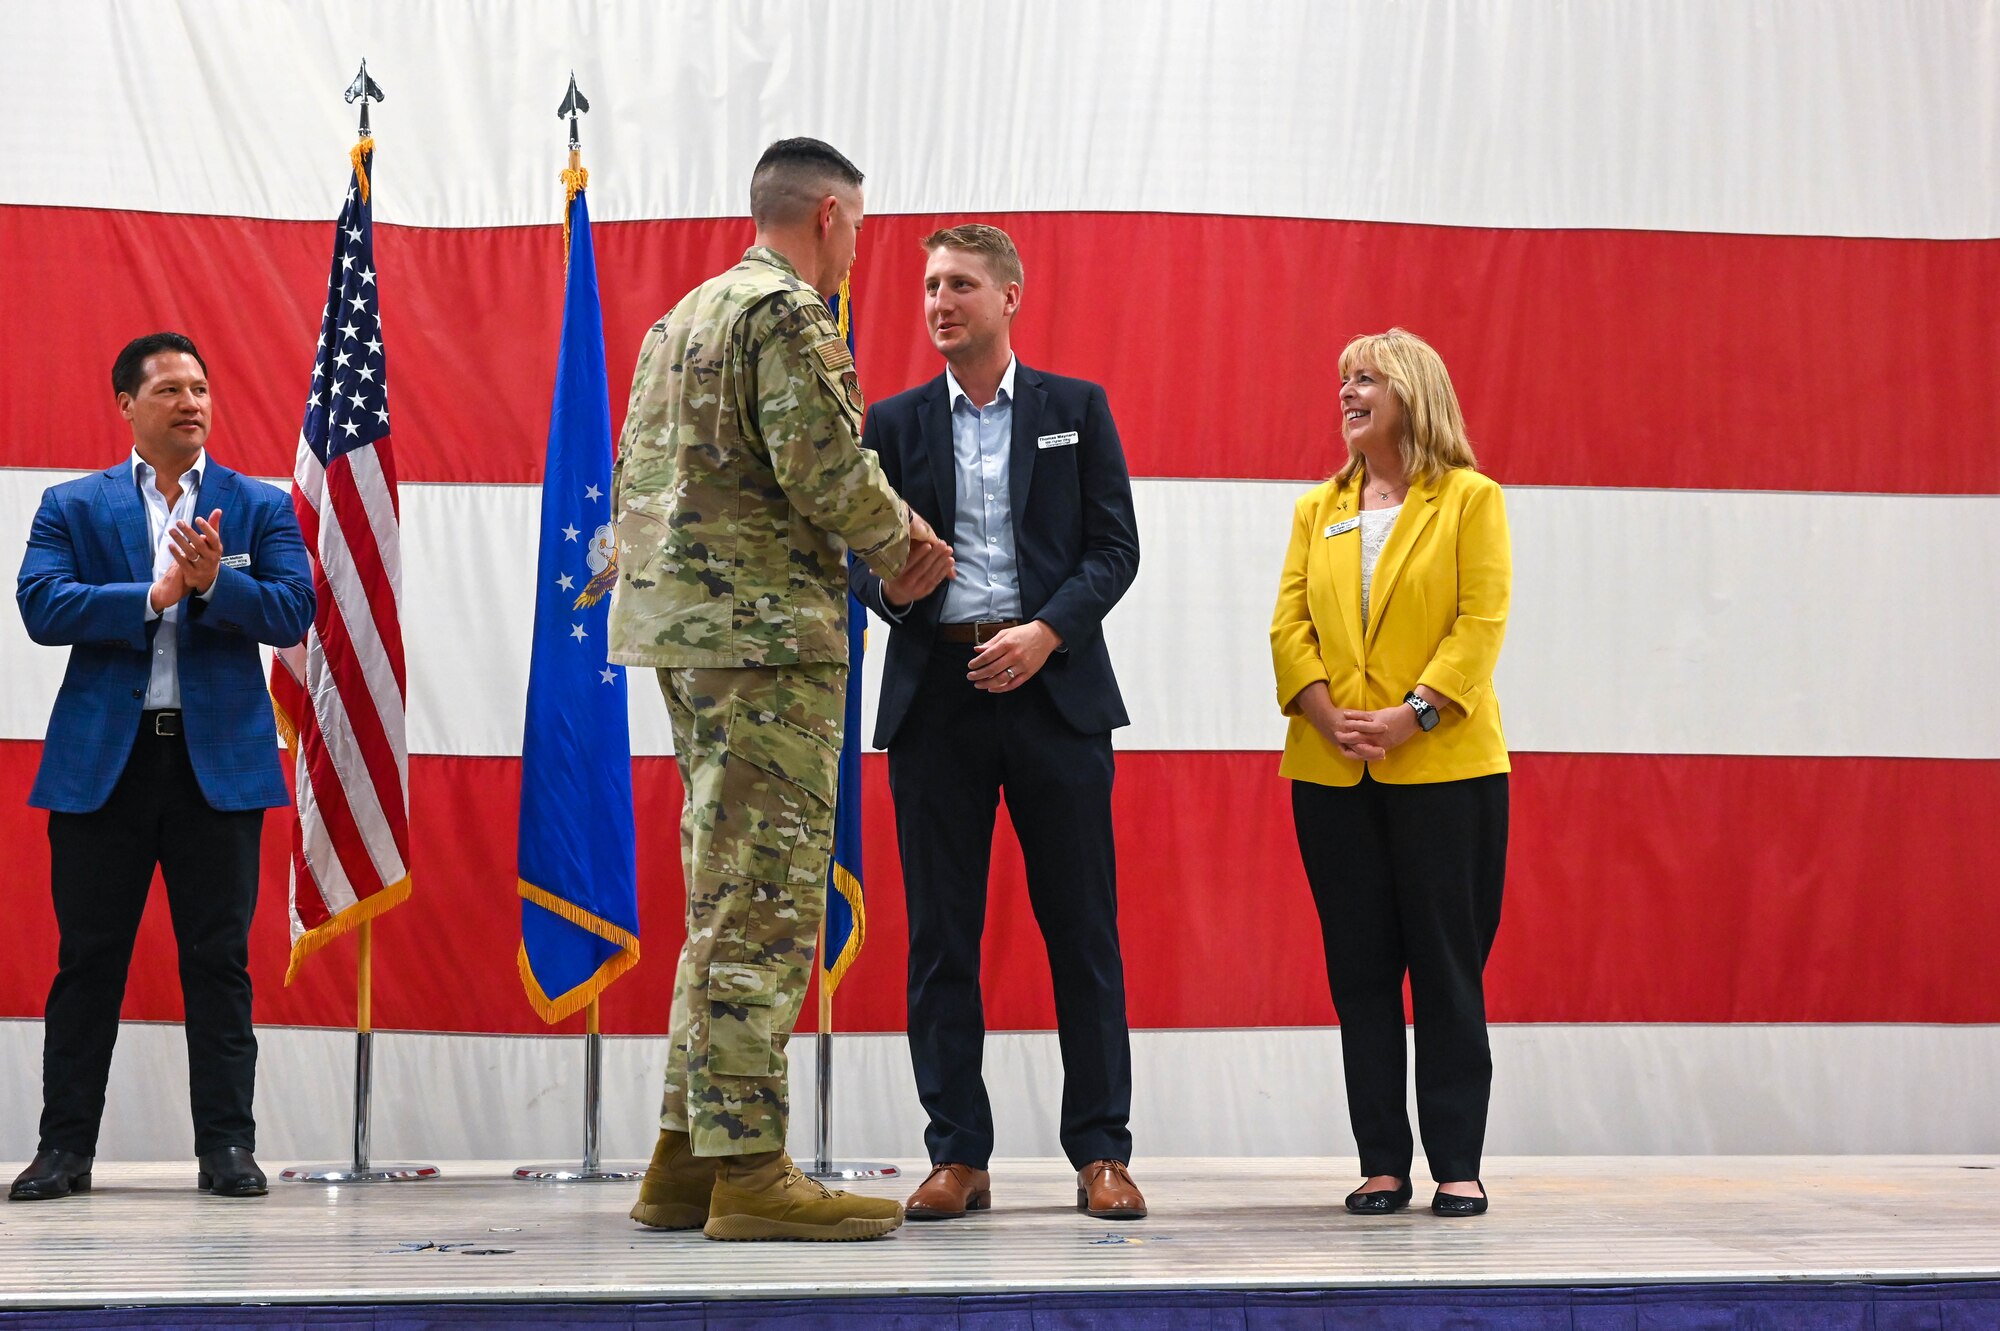 U.S. Air Force Chief Master Sgt. Jason Shaffer, 56th Fighter Wing command chief, coins Thomas Maynard and Jenni Thomas, honorary commander inductees, during a ceremony, Oct. 14, 2022, at Luke Air Force Base, Arizona.